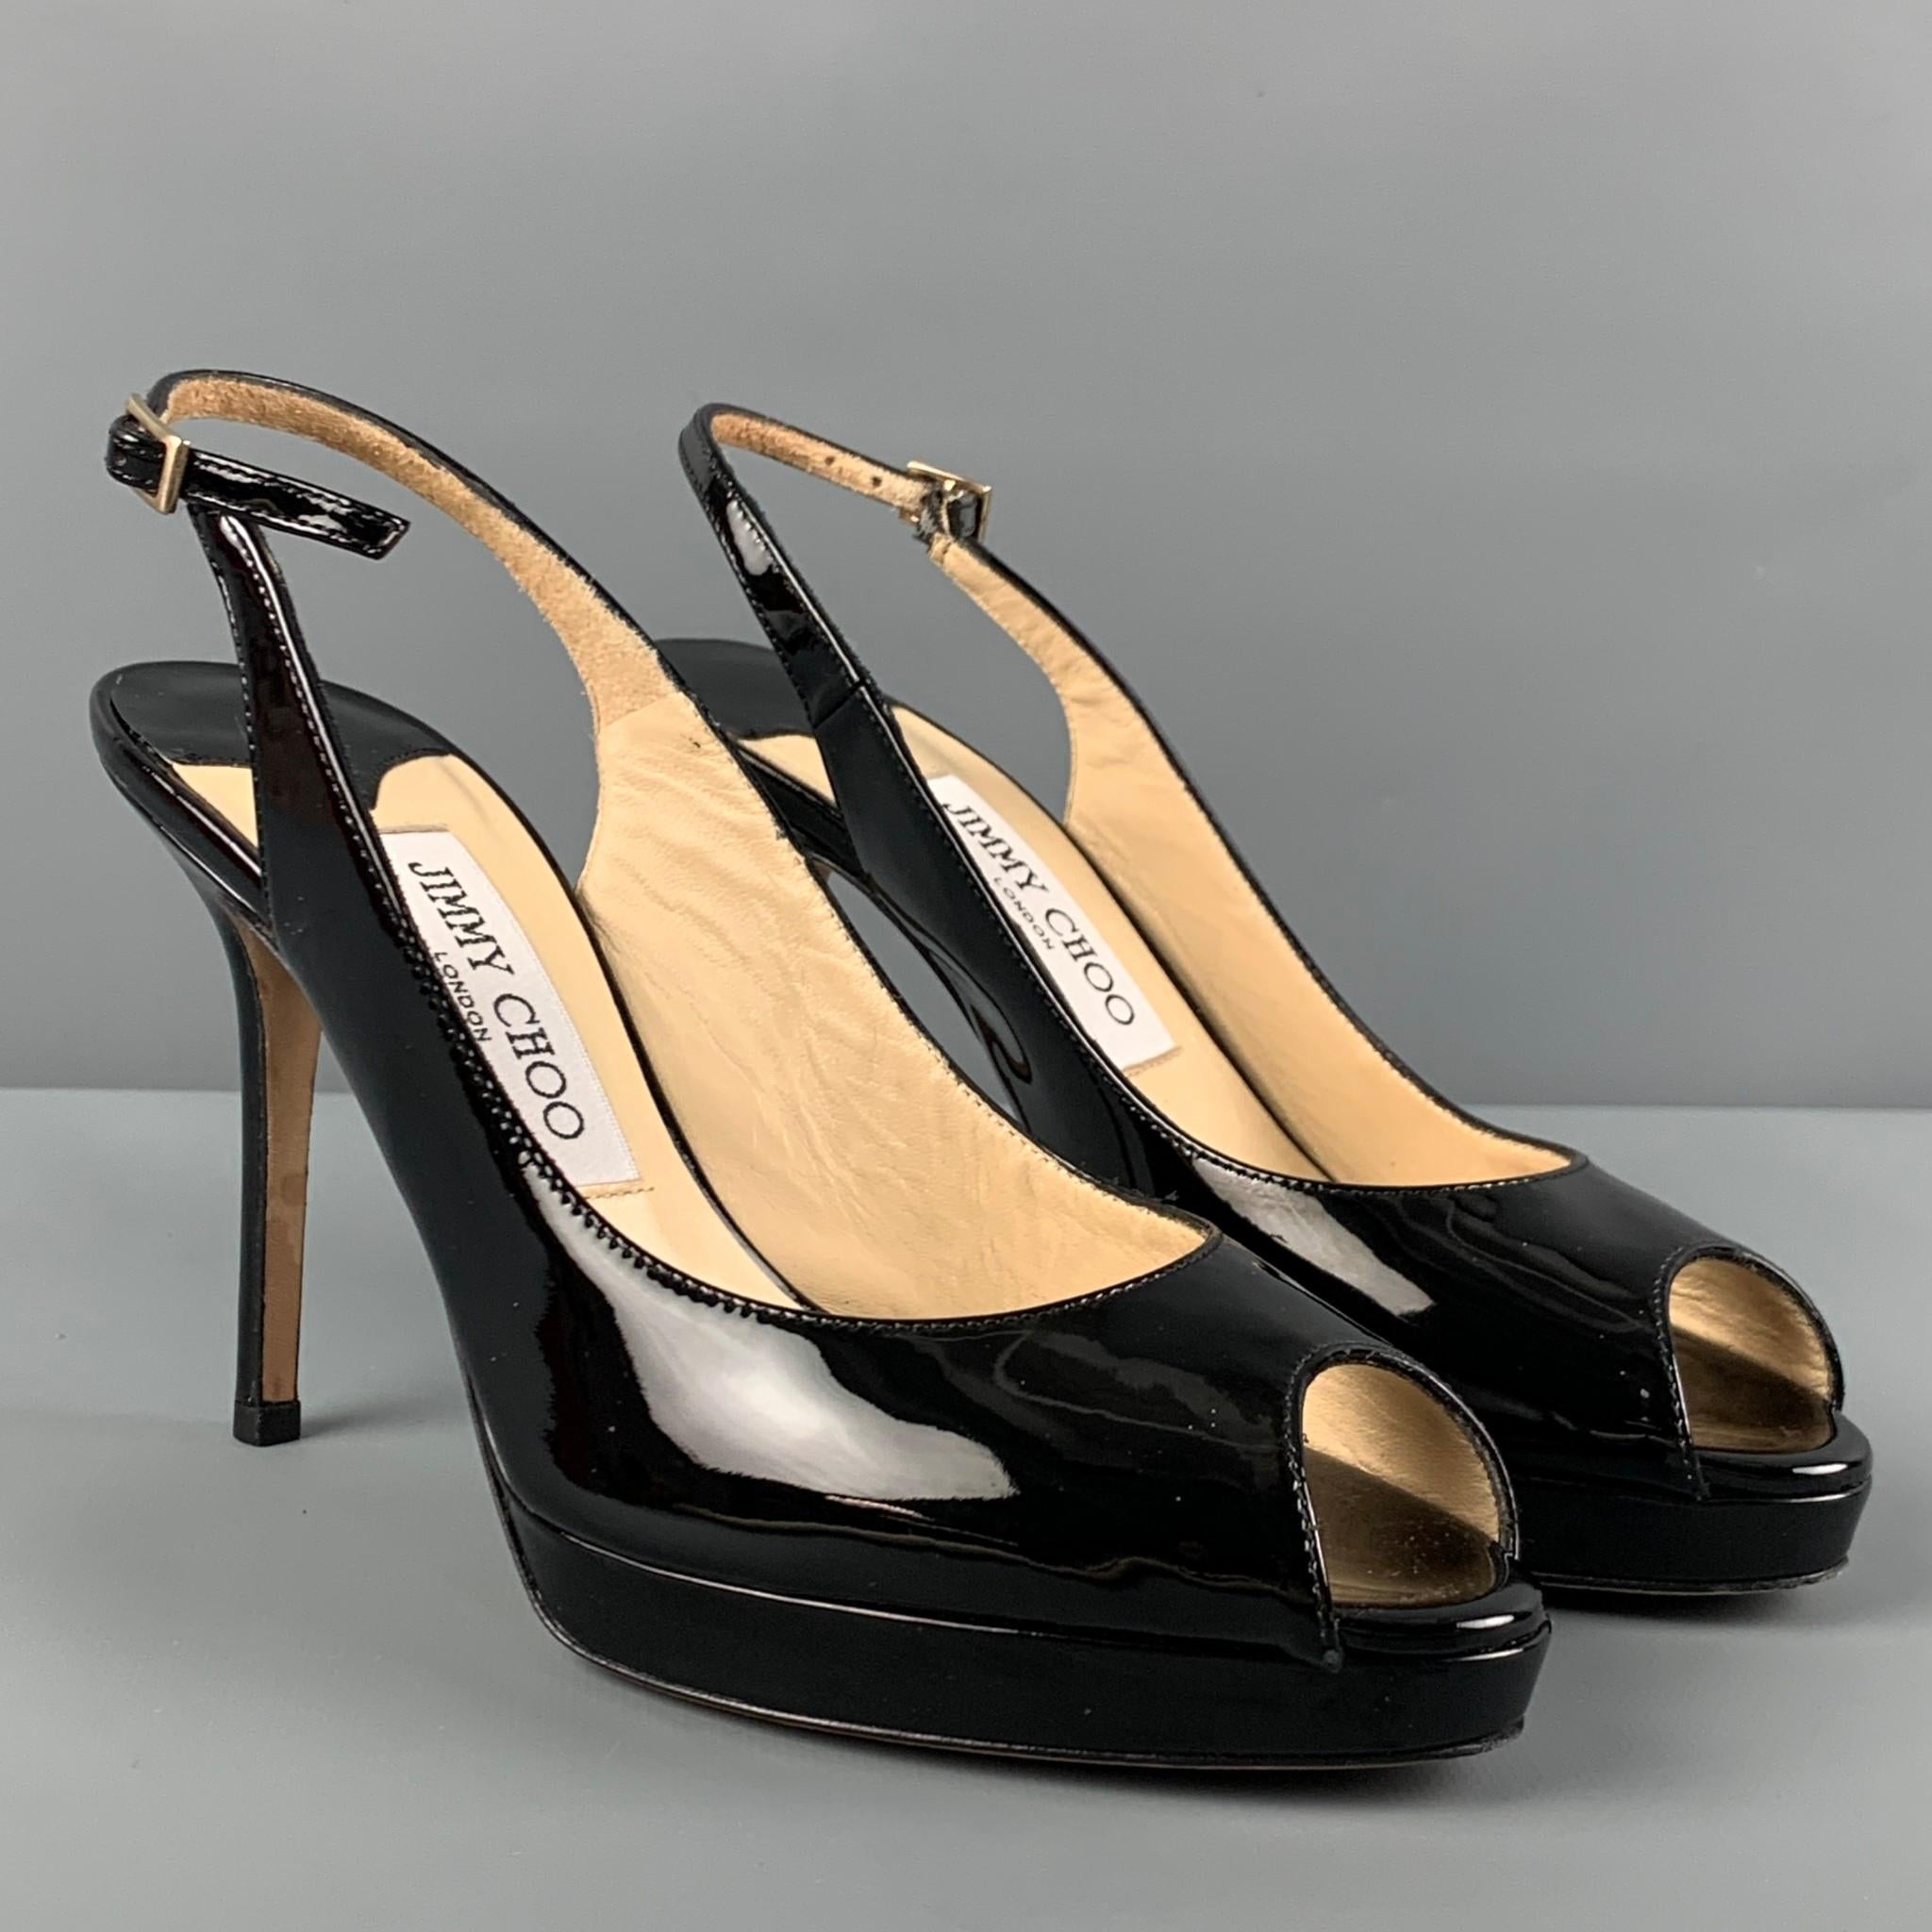 JIMMY CHOO 'Nova' pumps comes in a black patent leather featuring a peep toe, slingback closure, and a stiletto heel. Includes box. Made in Italy. 

Excellent Pre-Owned Condition.
Marked: 37
Original Retail Price: $650.00

Measurements:

Heel: 4